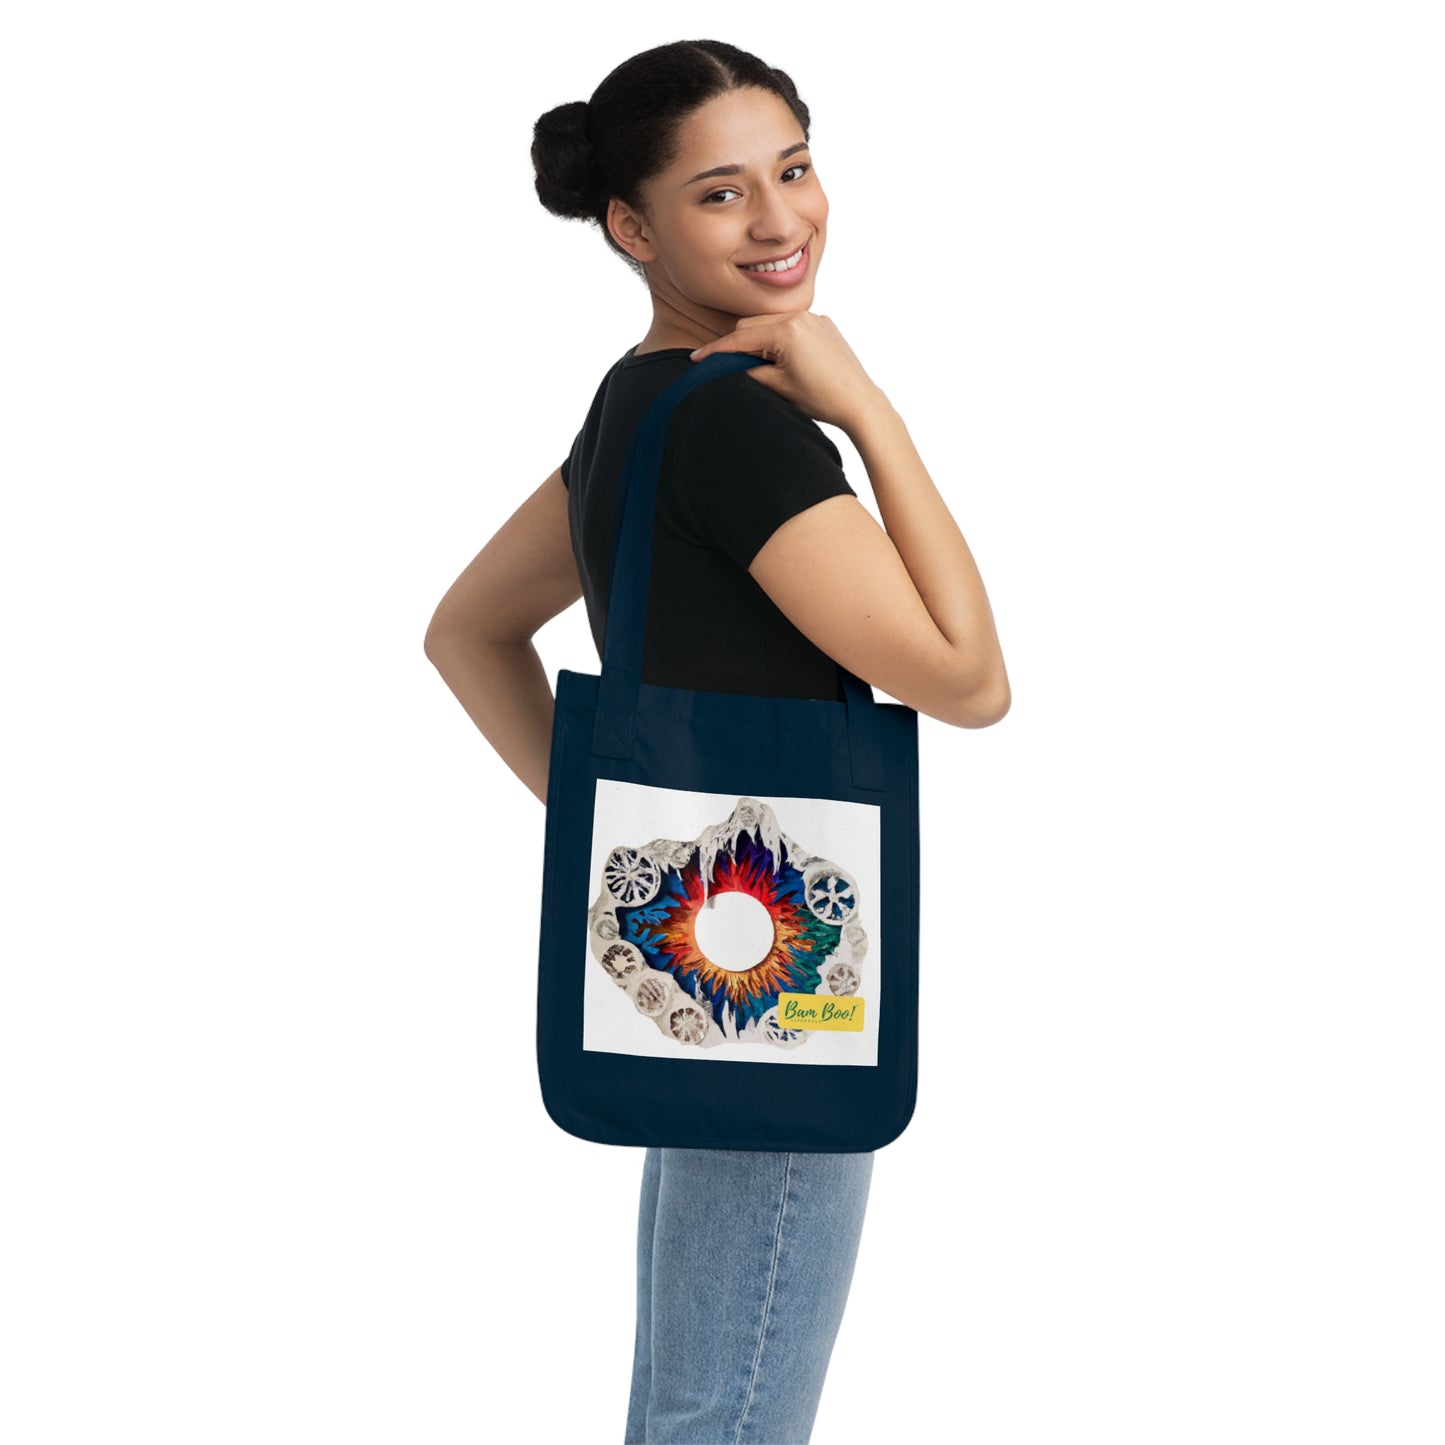 'My Shapes of Life' - Bam Boo! Lifestyle Eco-friendly Tote Bag